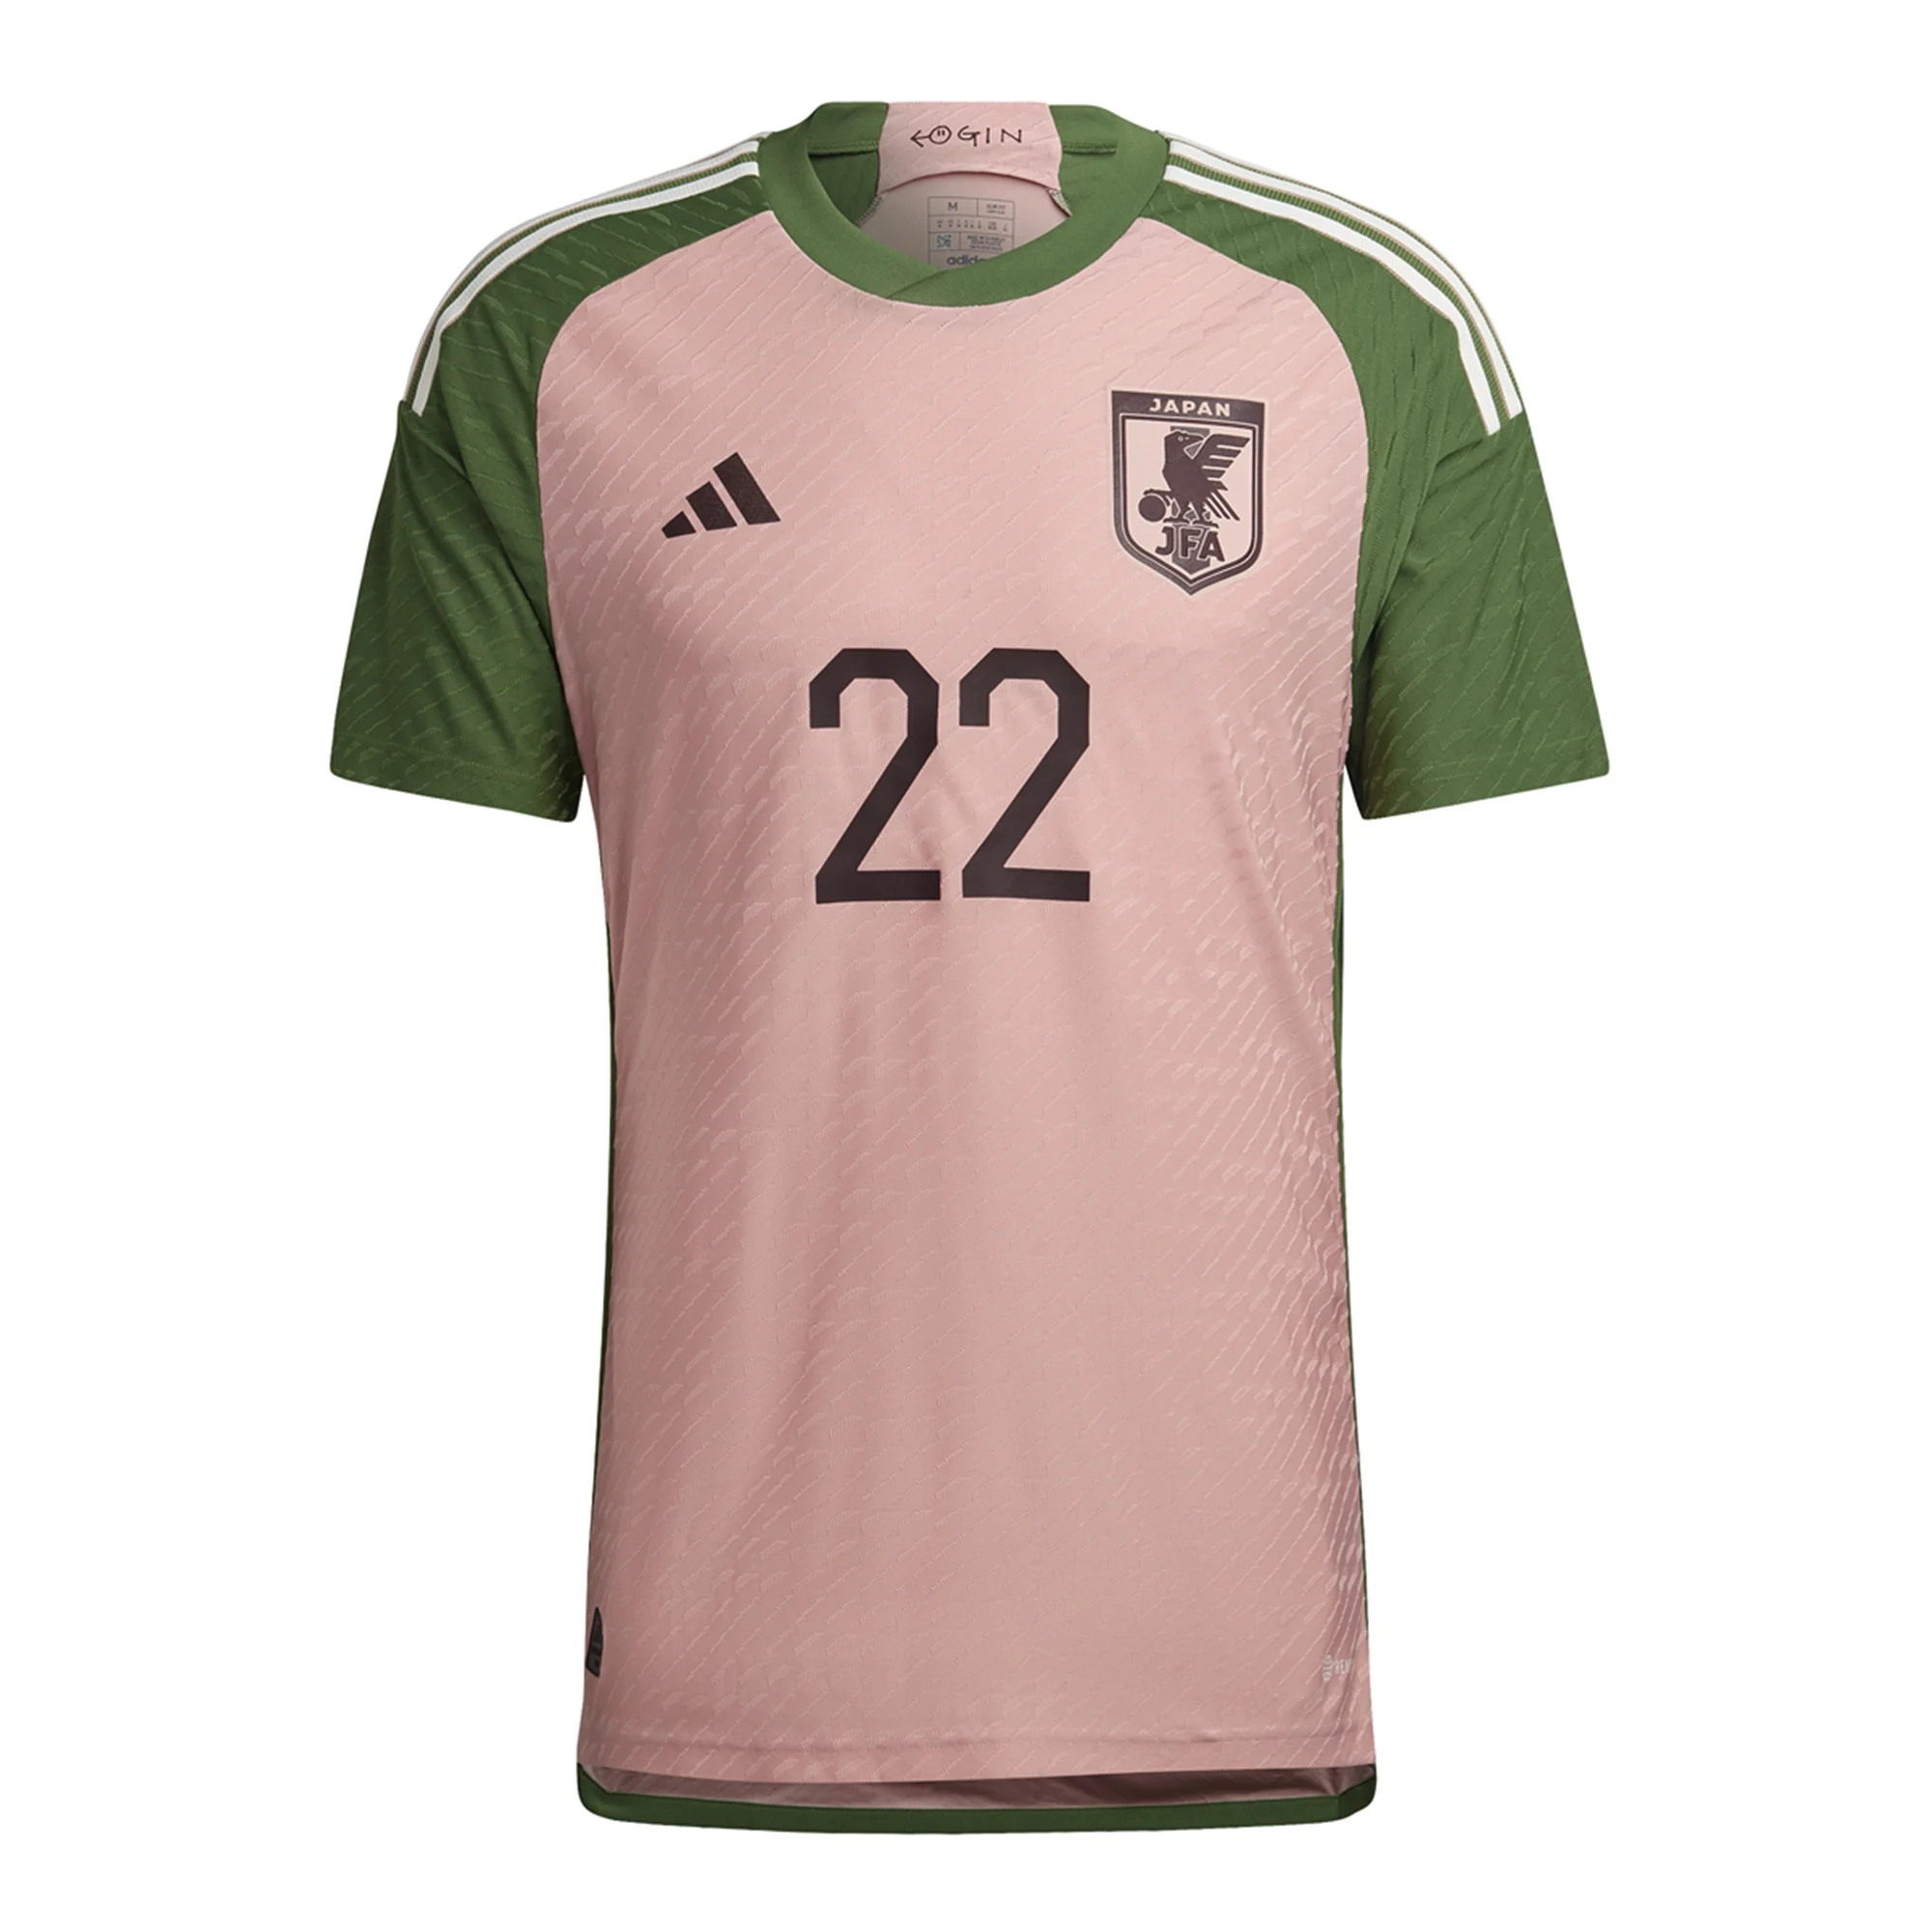 Japan 22/23 Special Edition Third by adidas – Arena Jerseys